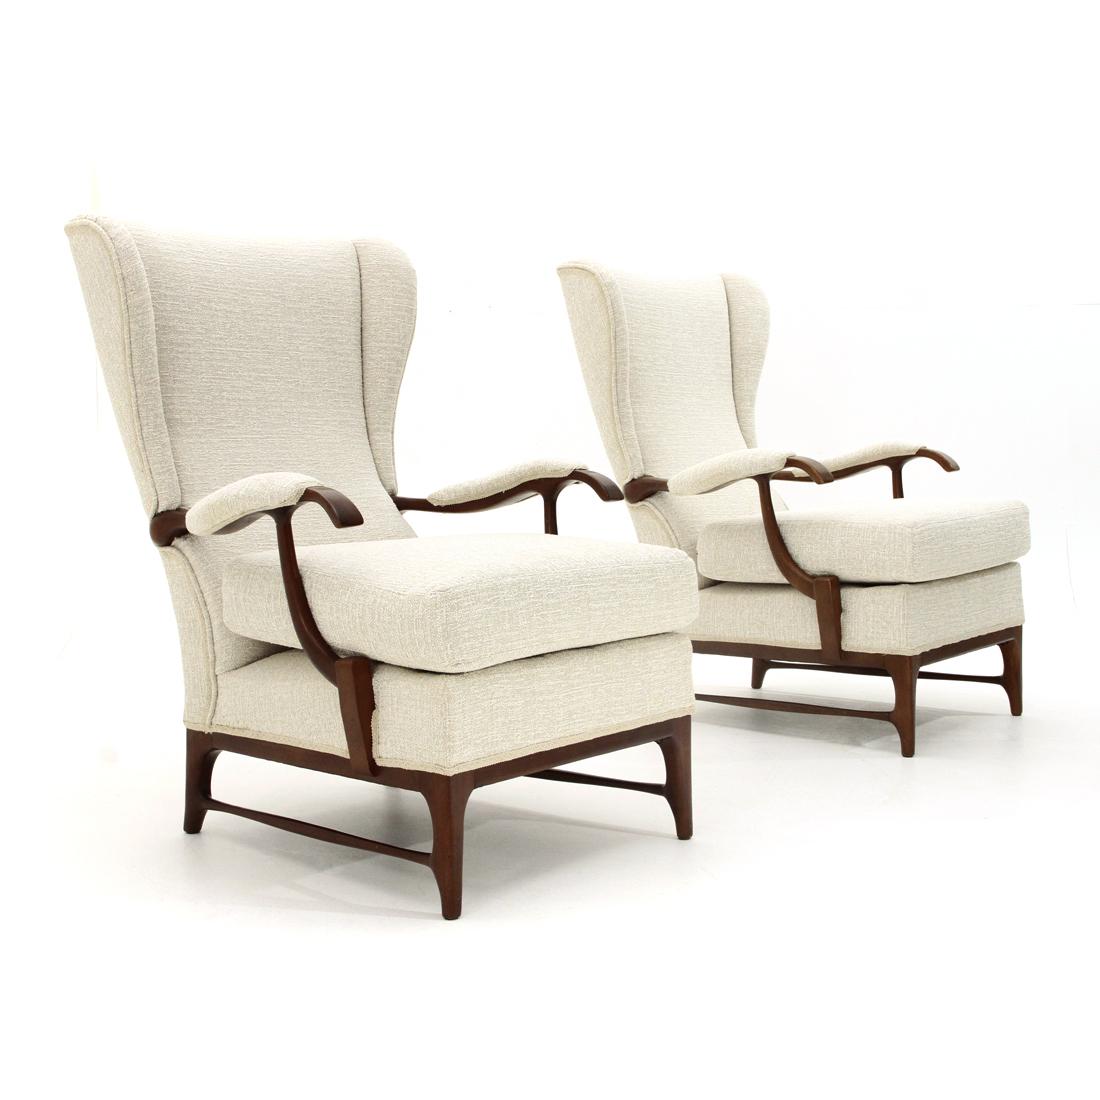 Pair of armchairs produced in the 1950s by Framar of Pavia, a company founded by Mario Franconi.
Solid wood structure.
Padded and lined with new ivory white fabric.
Good general condition, some signs on the wooden part.

Dimensions: Length 70